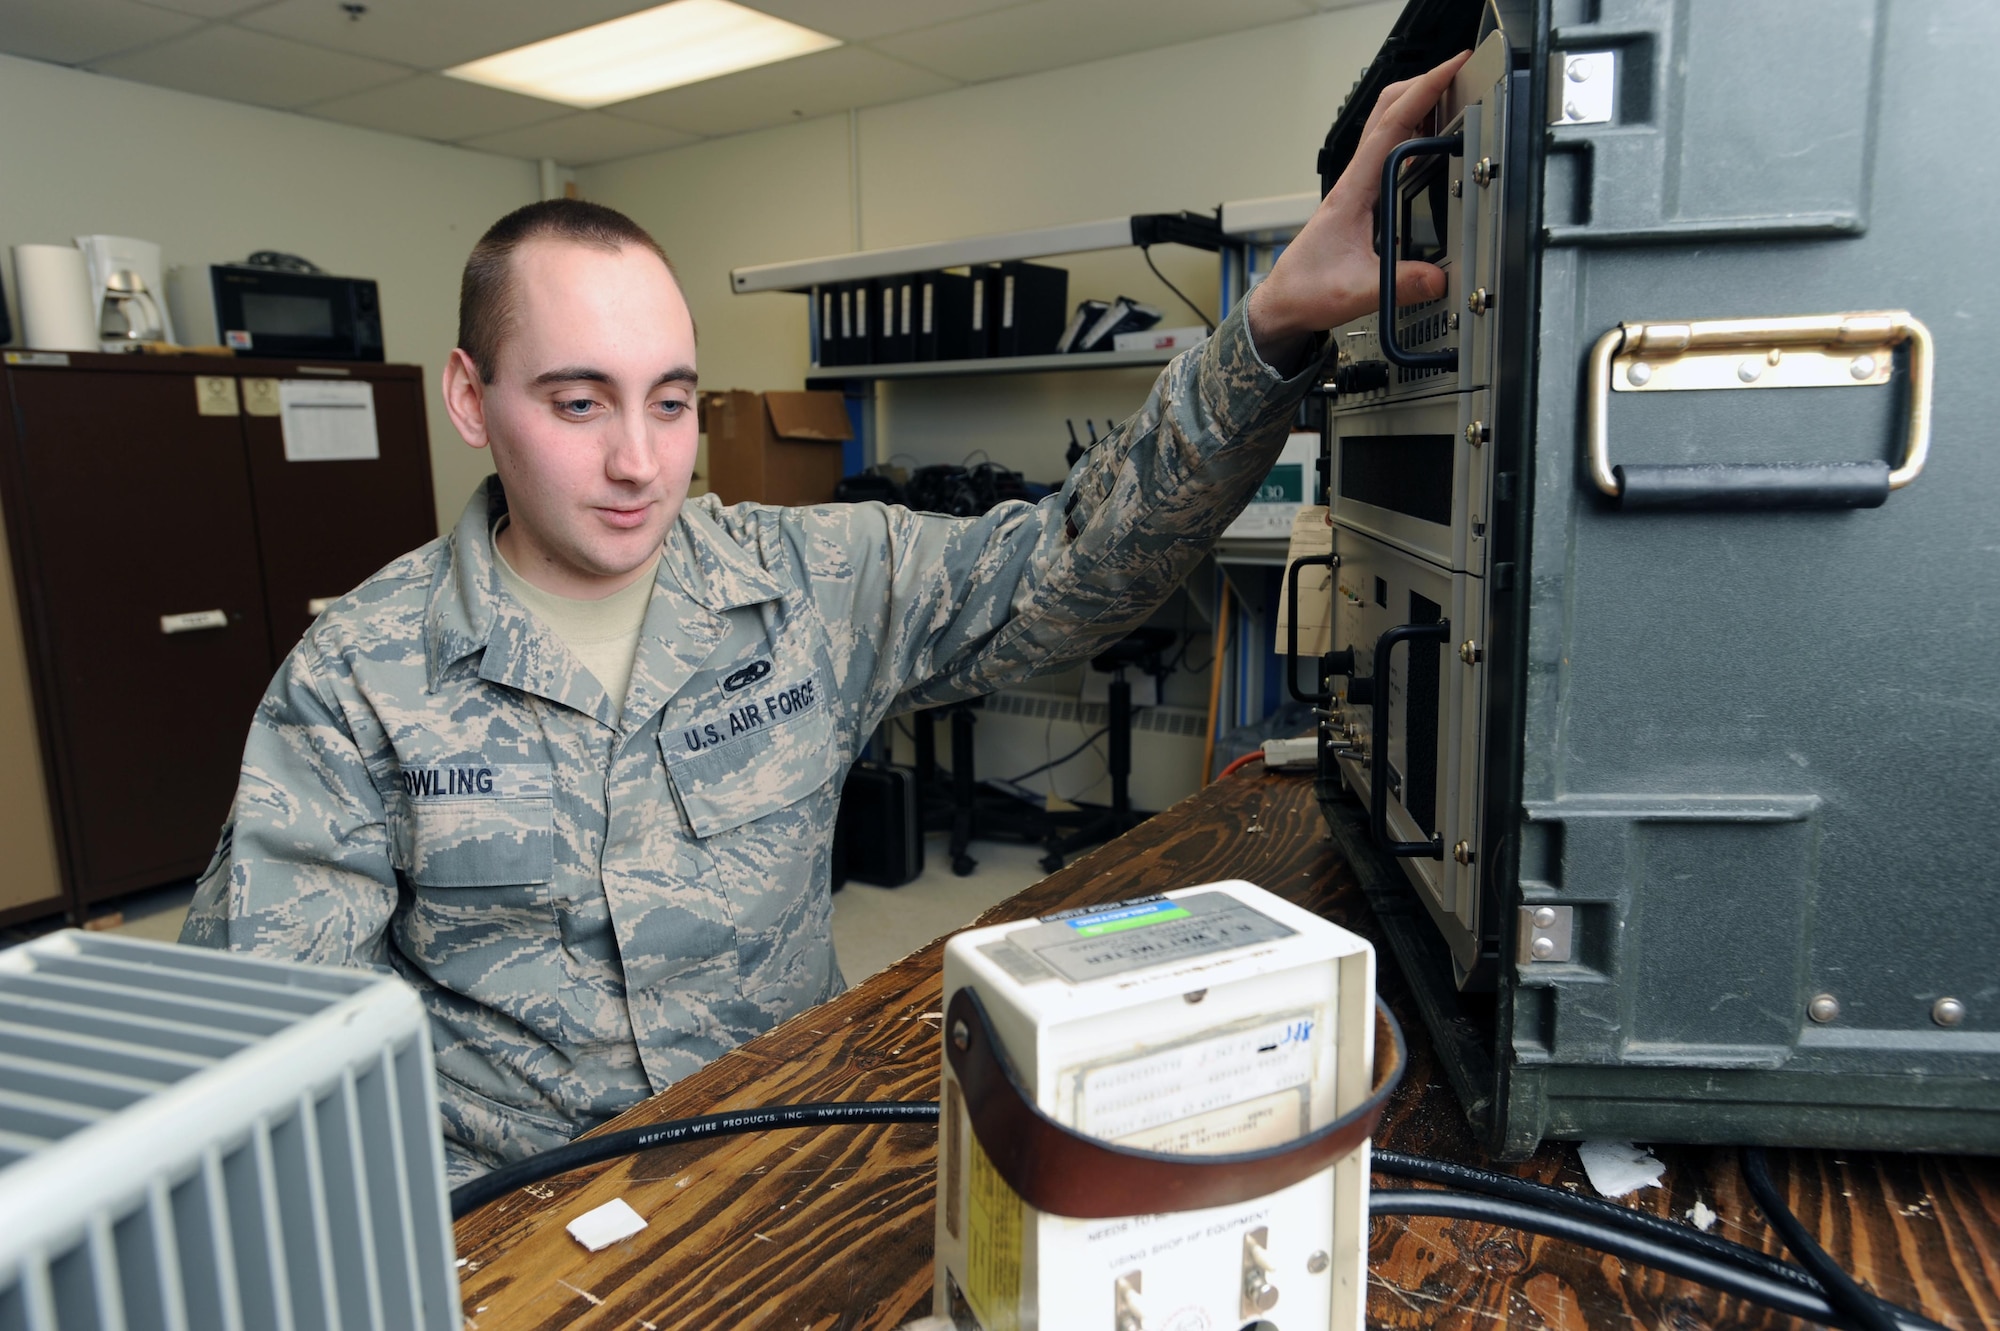 Airman 1st Class William Dowling, 319th Communication Squadron, monitors a watt meter to perform a preventative maintenance inspection on a URC 119 Radio. Airman Dowling shares his first-hand account of second-mile leadership as a young airman who has been affected by the leadership style. (U.S. Air Force photo/Tech. Sgt. Johnny Saldivar)